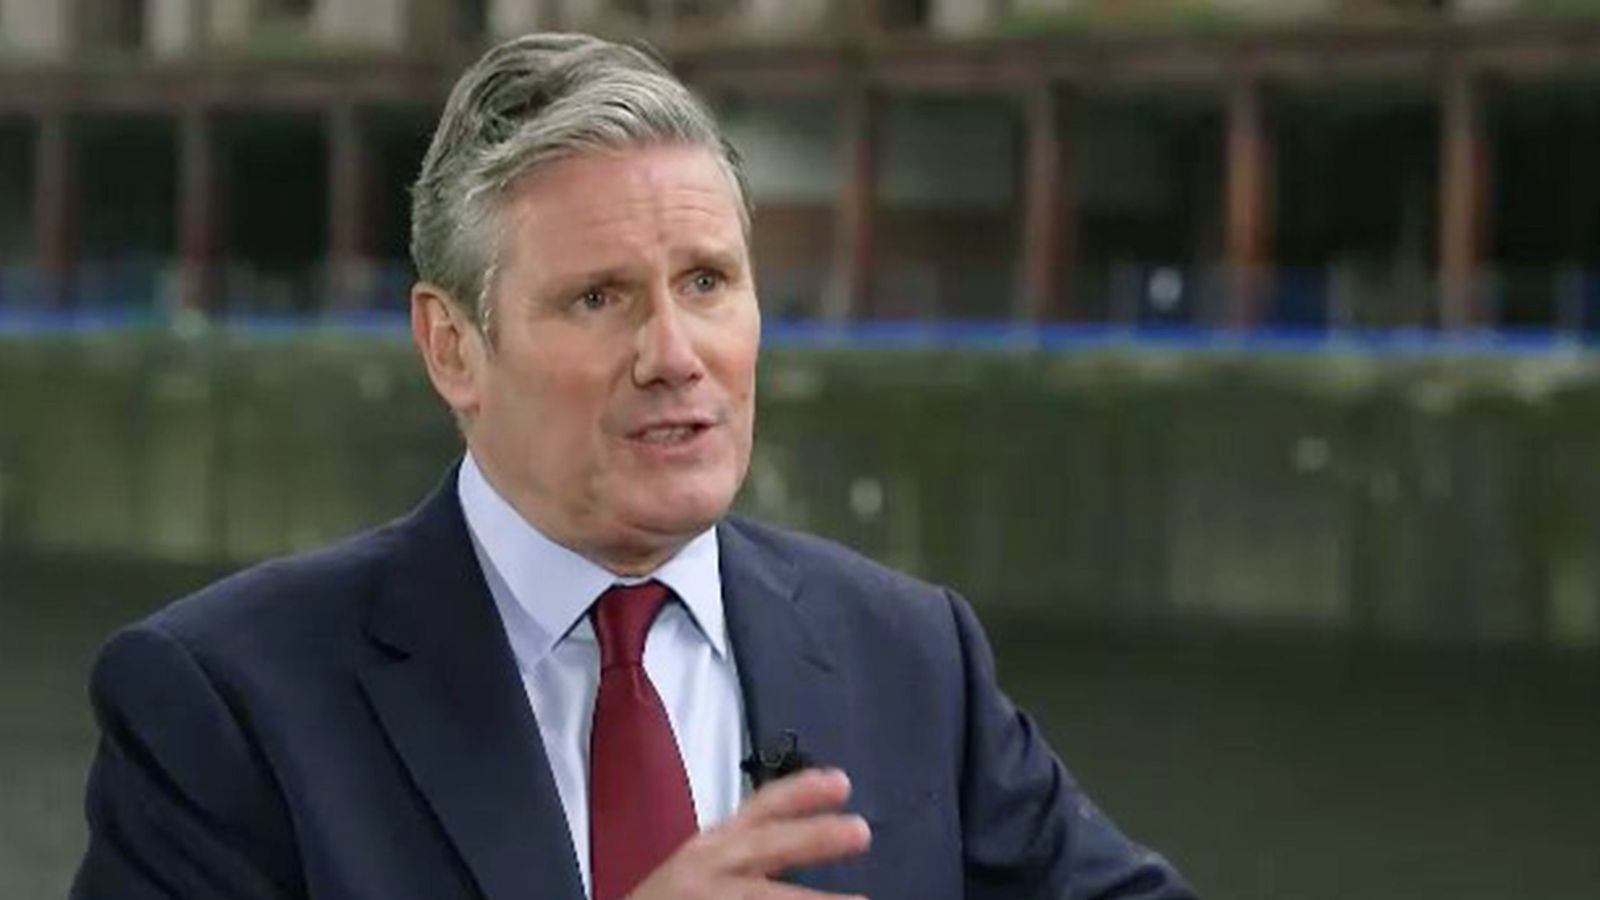 Sir Keir Starmer seeks to clarify Gaza remarks following backlash from Labour councillors